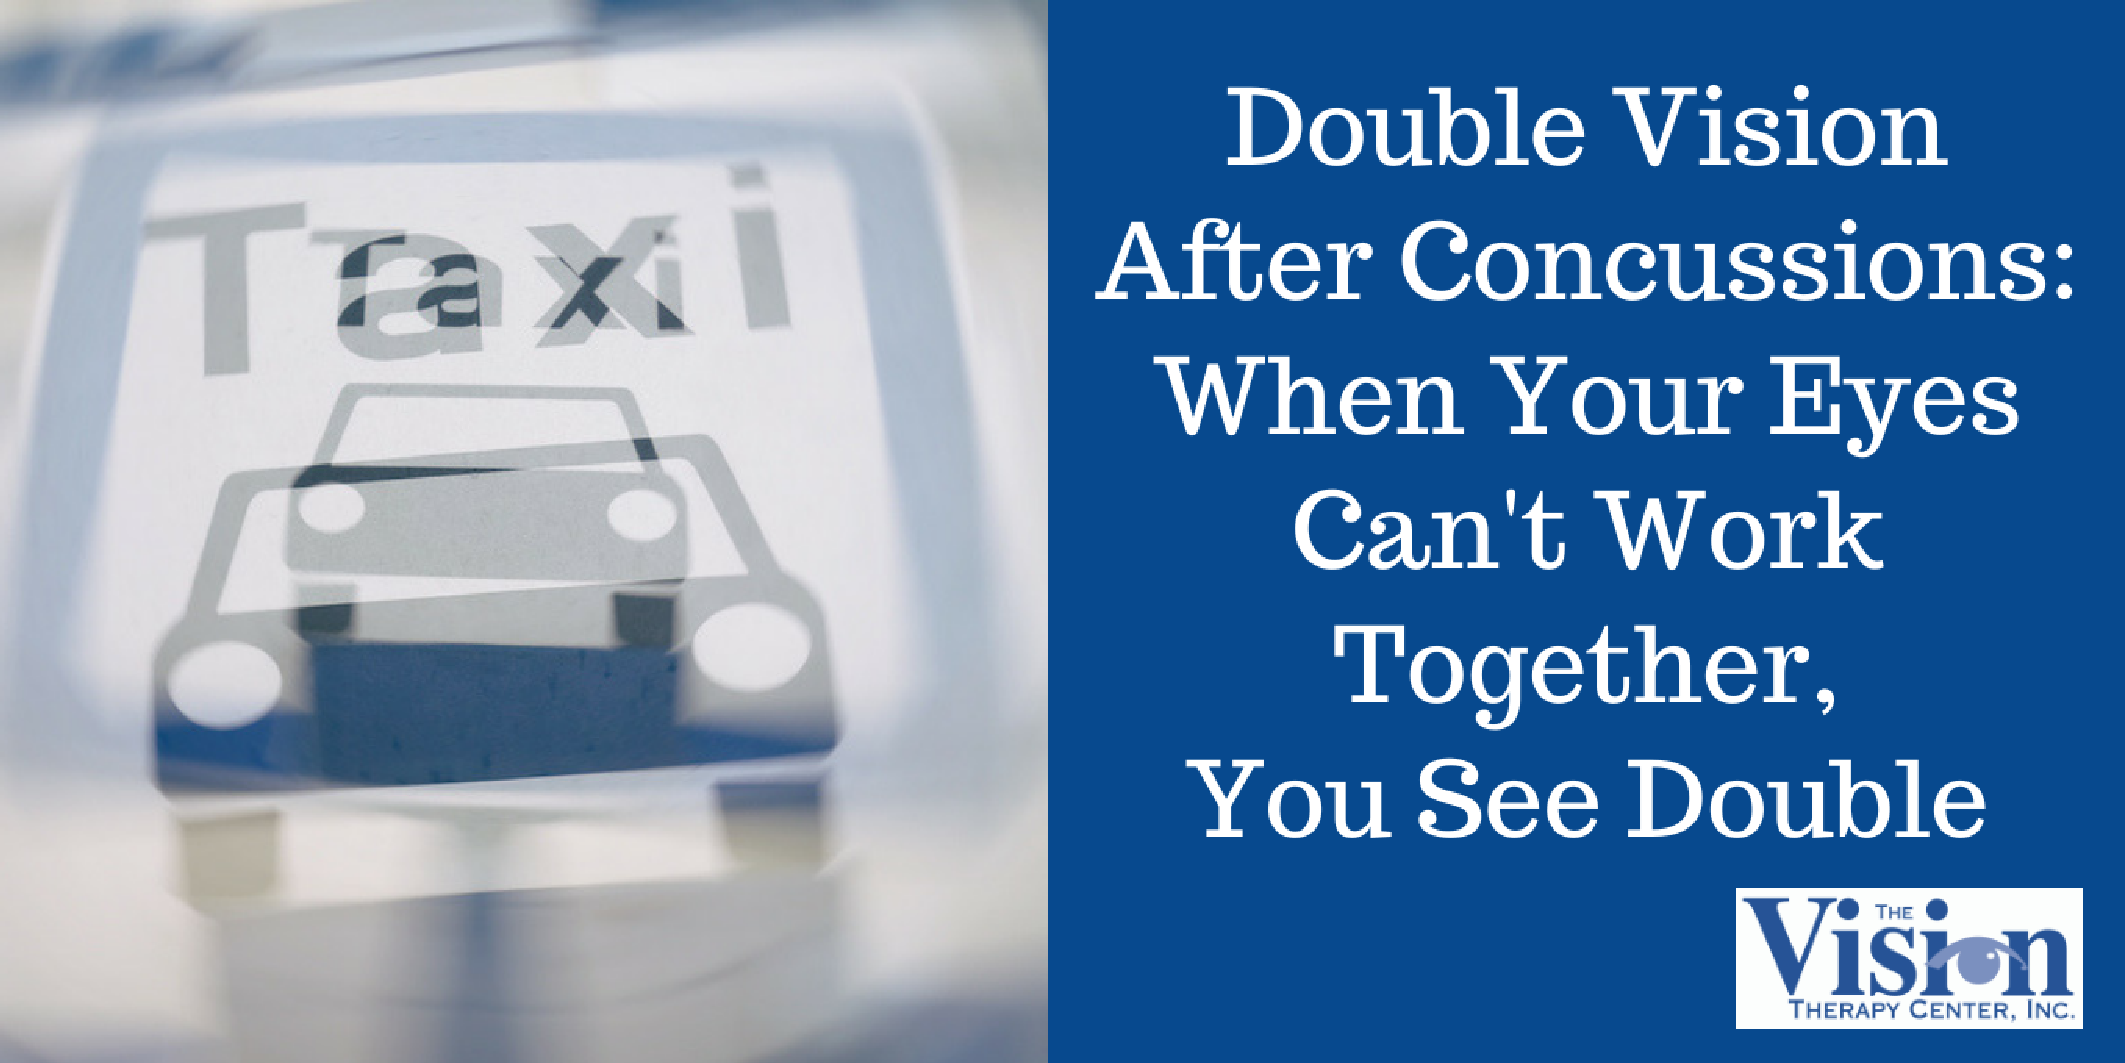 Double Vision After Concussions: When Your Eyes Can’t Work Together, You See Double